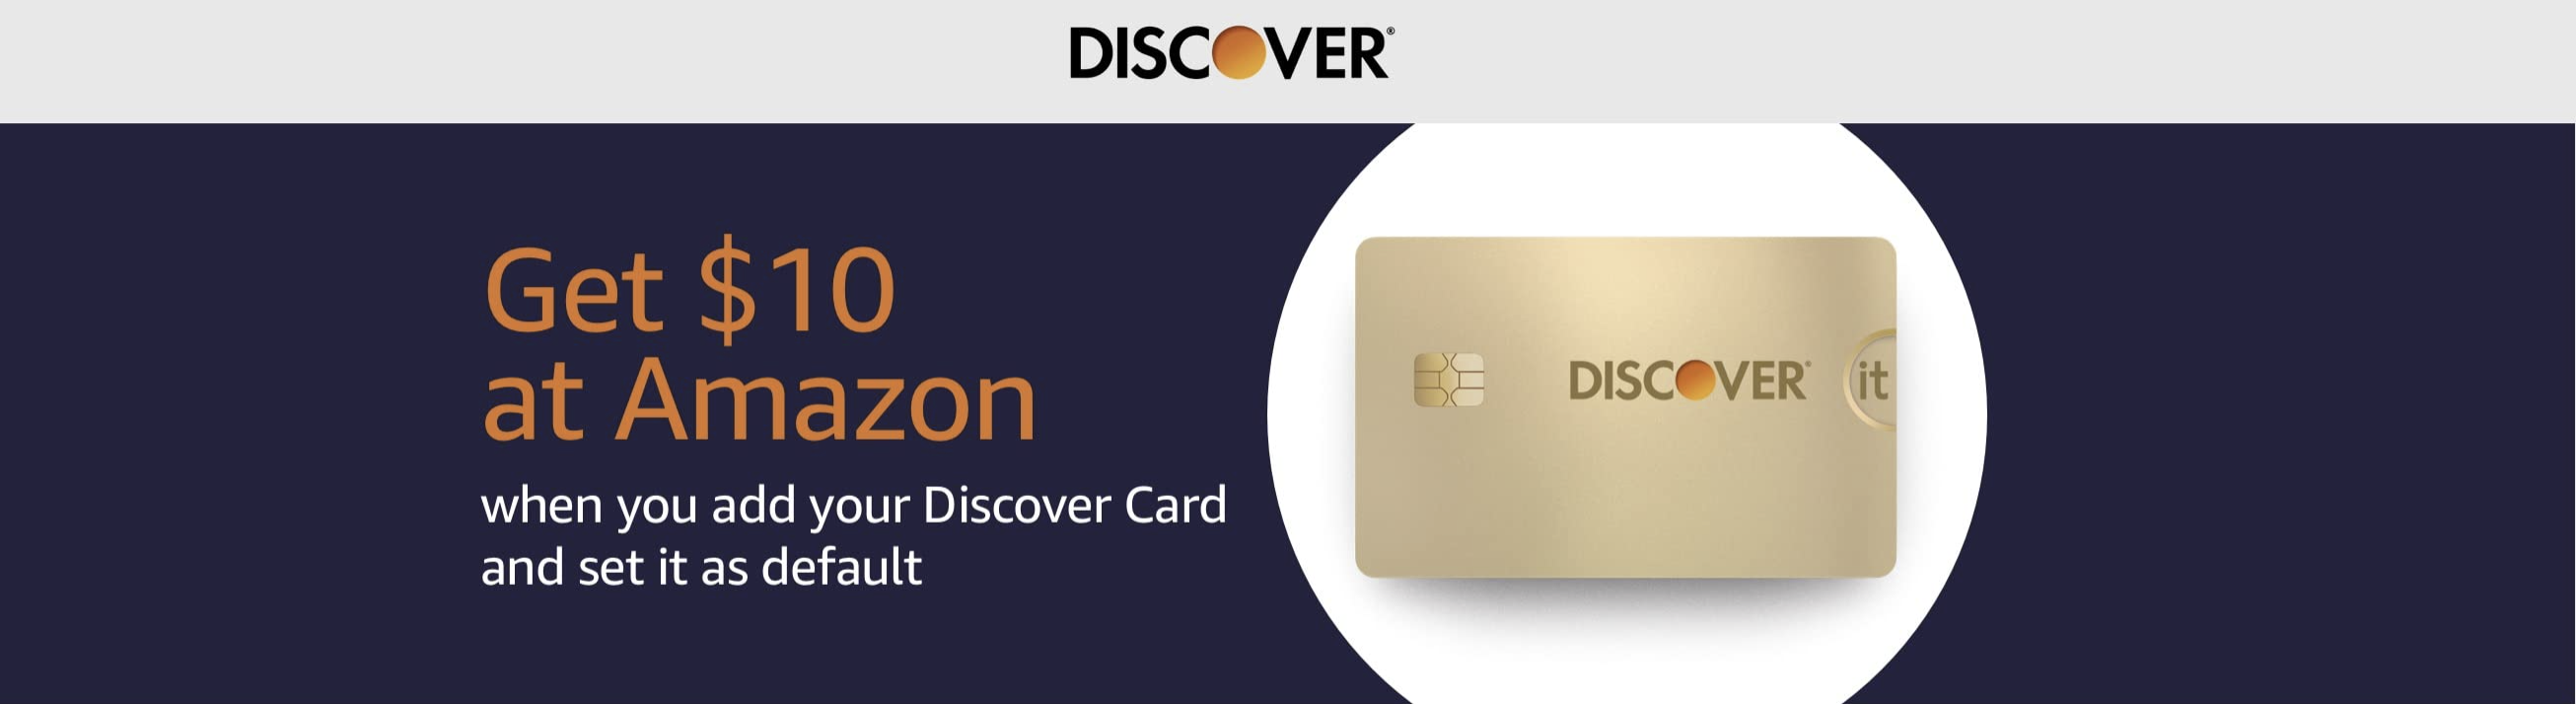 YMMV Amazon $10 Credit for making Discover Card as Default